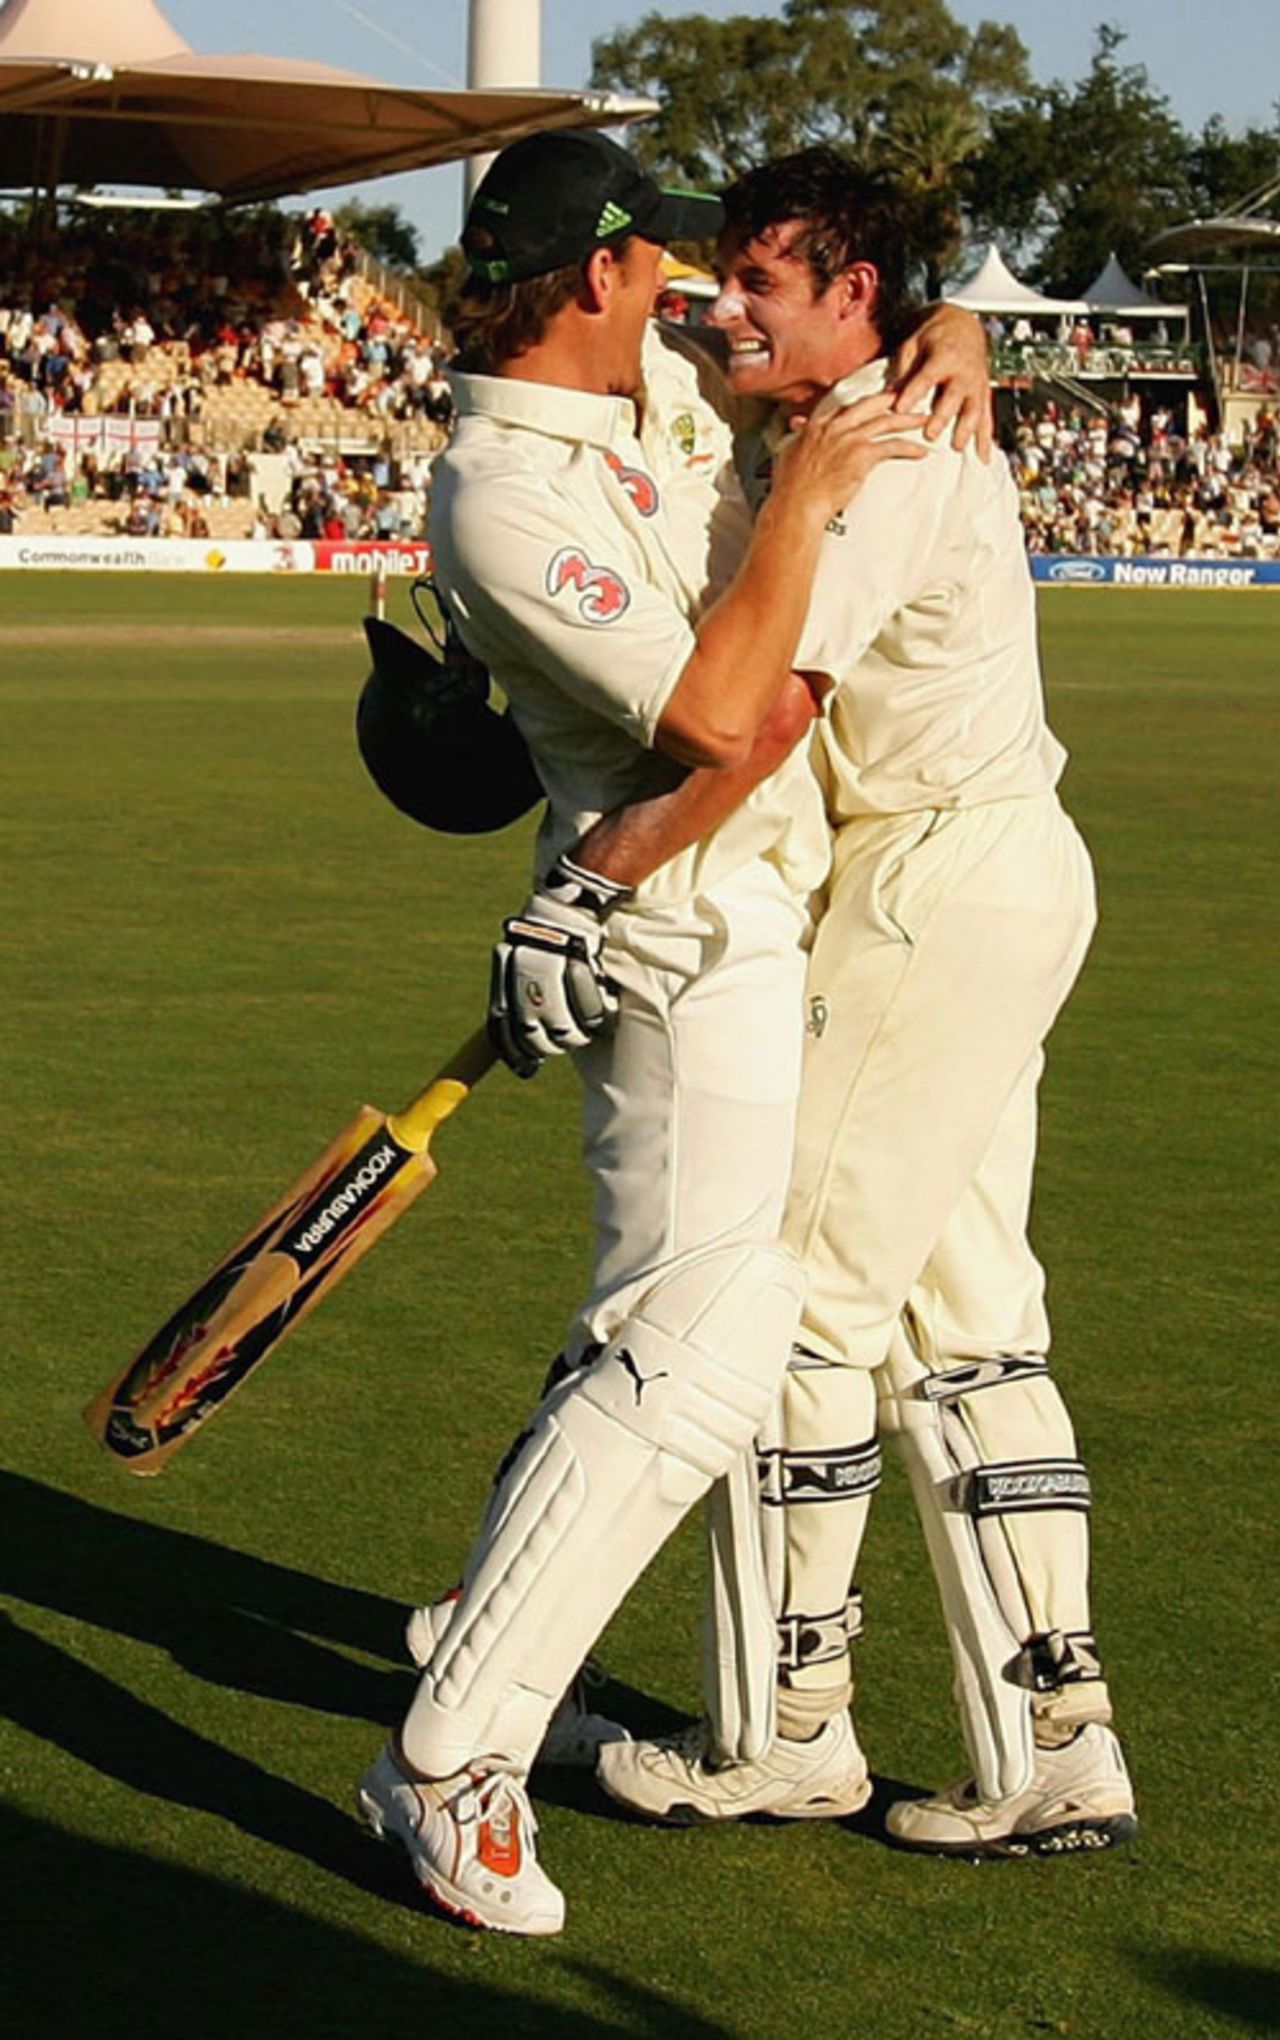 Done it! Michael Hussey and Adam Gilchrist celebrate victory, Australia v England, 2nd Test, Adelaide, December 5, 2006